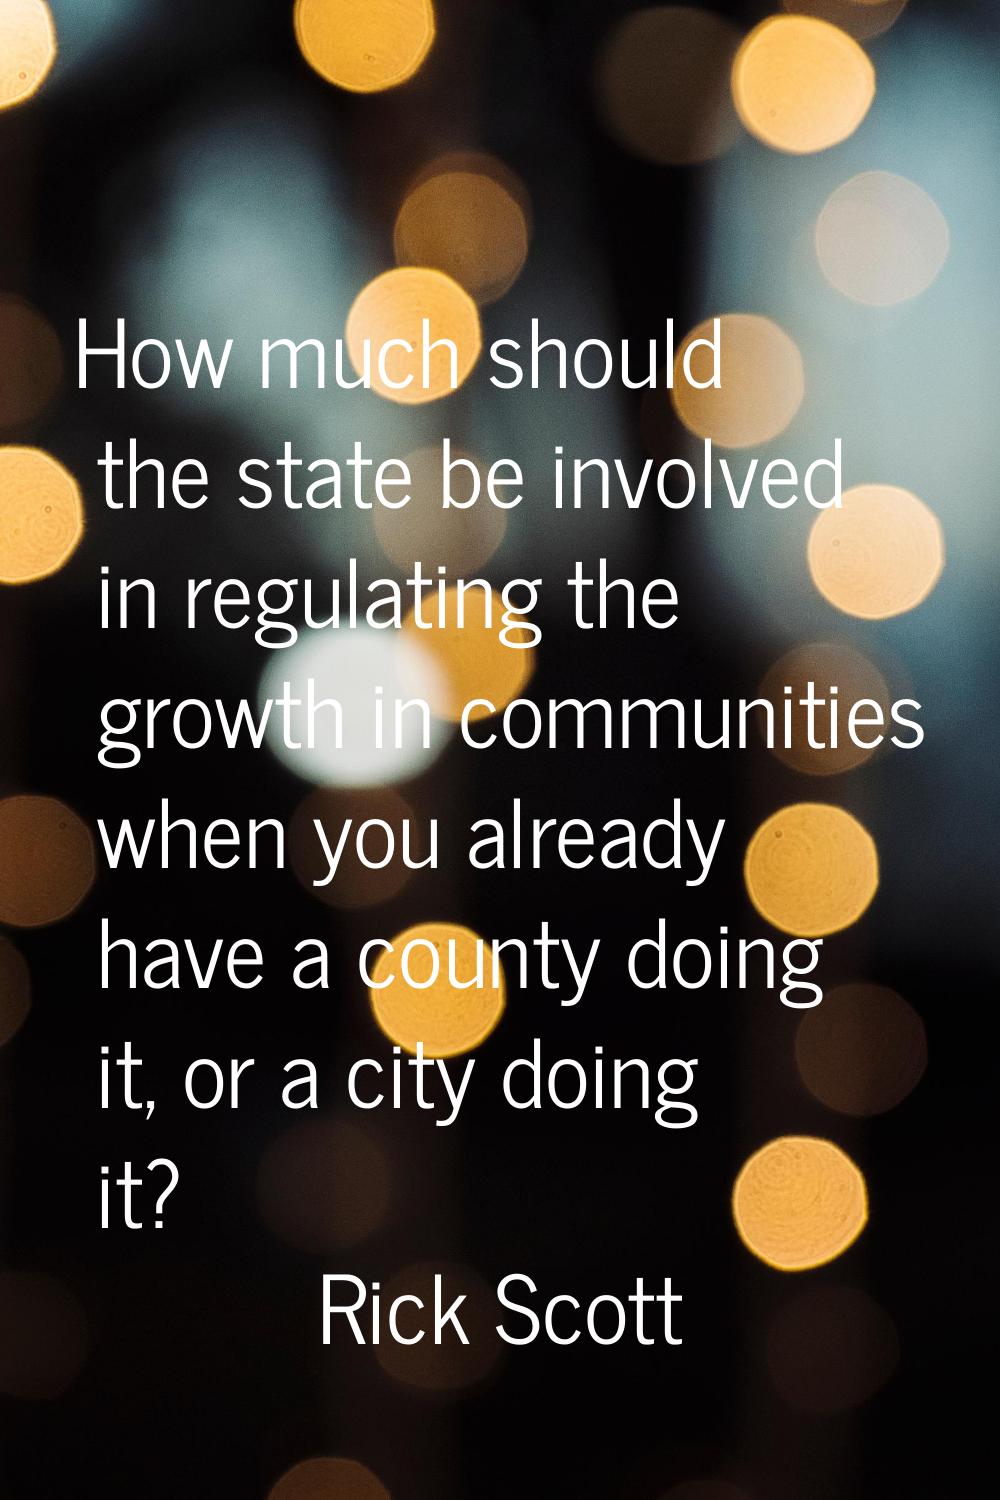 How much should the state be involved in regulating the growth in communities when you already have